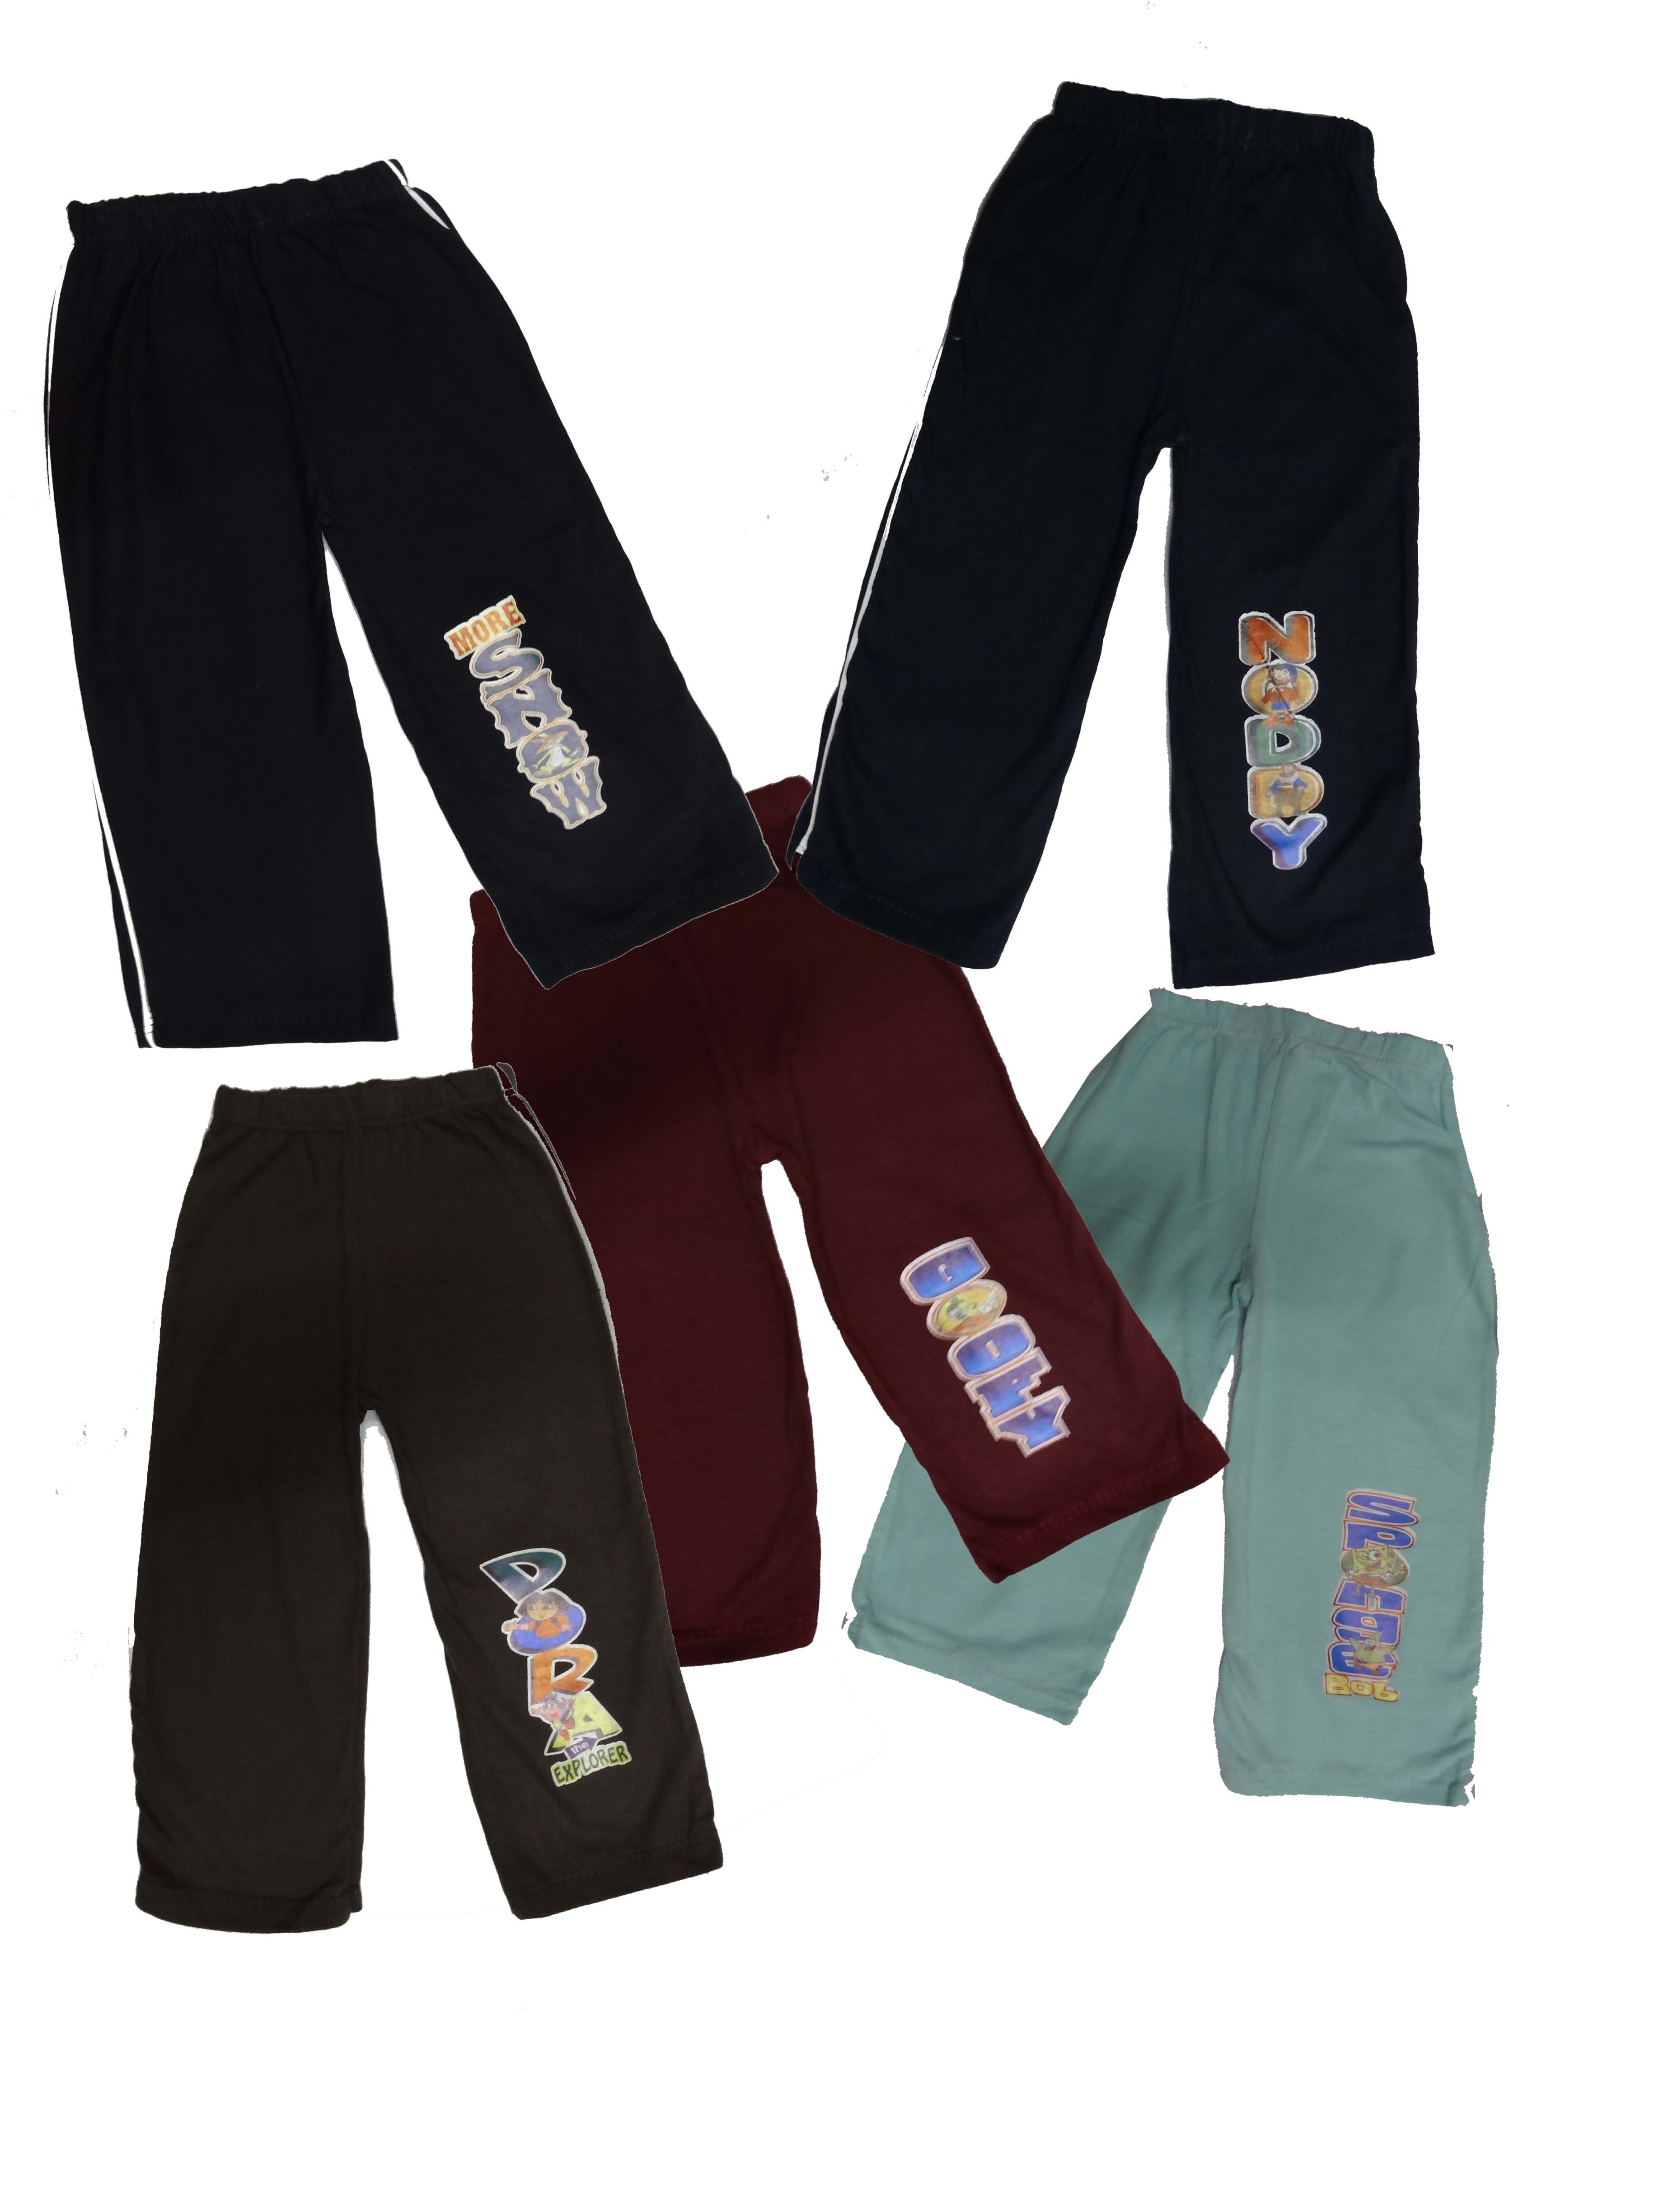 Buy Kids track pant (Set of 5) Online @ ₹269 from ShopClues